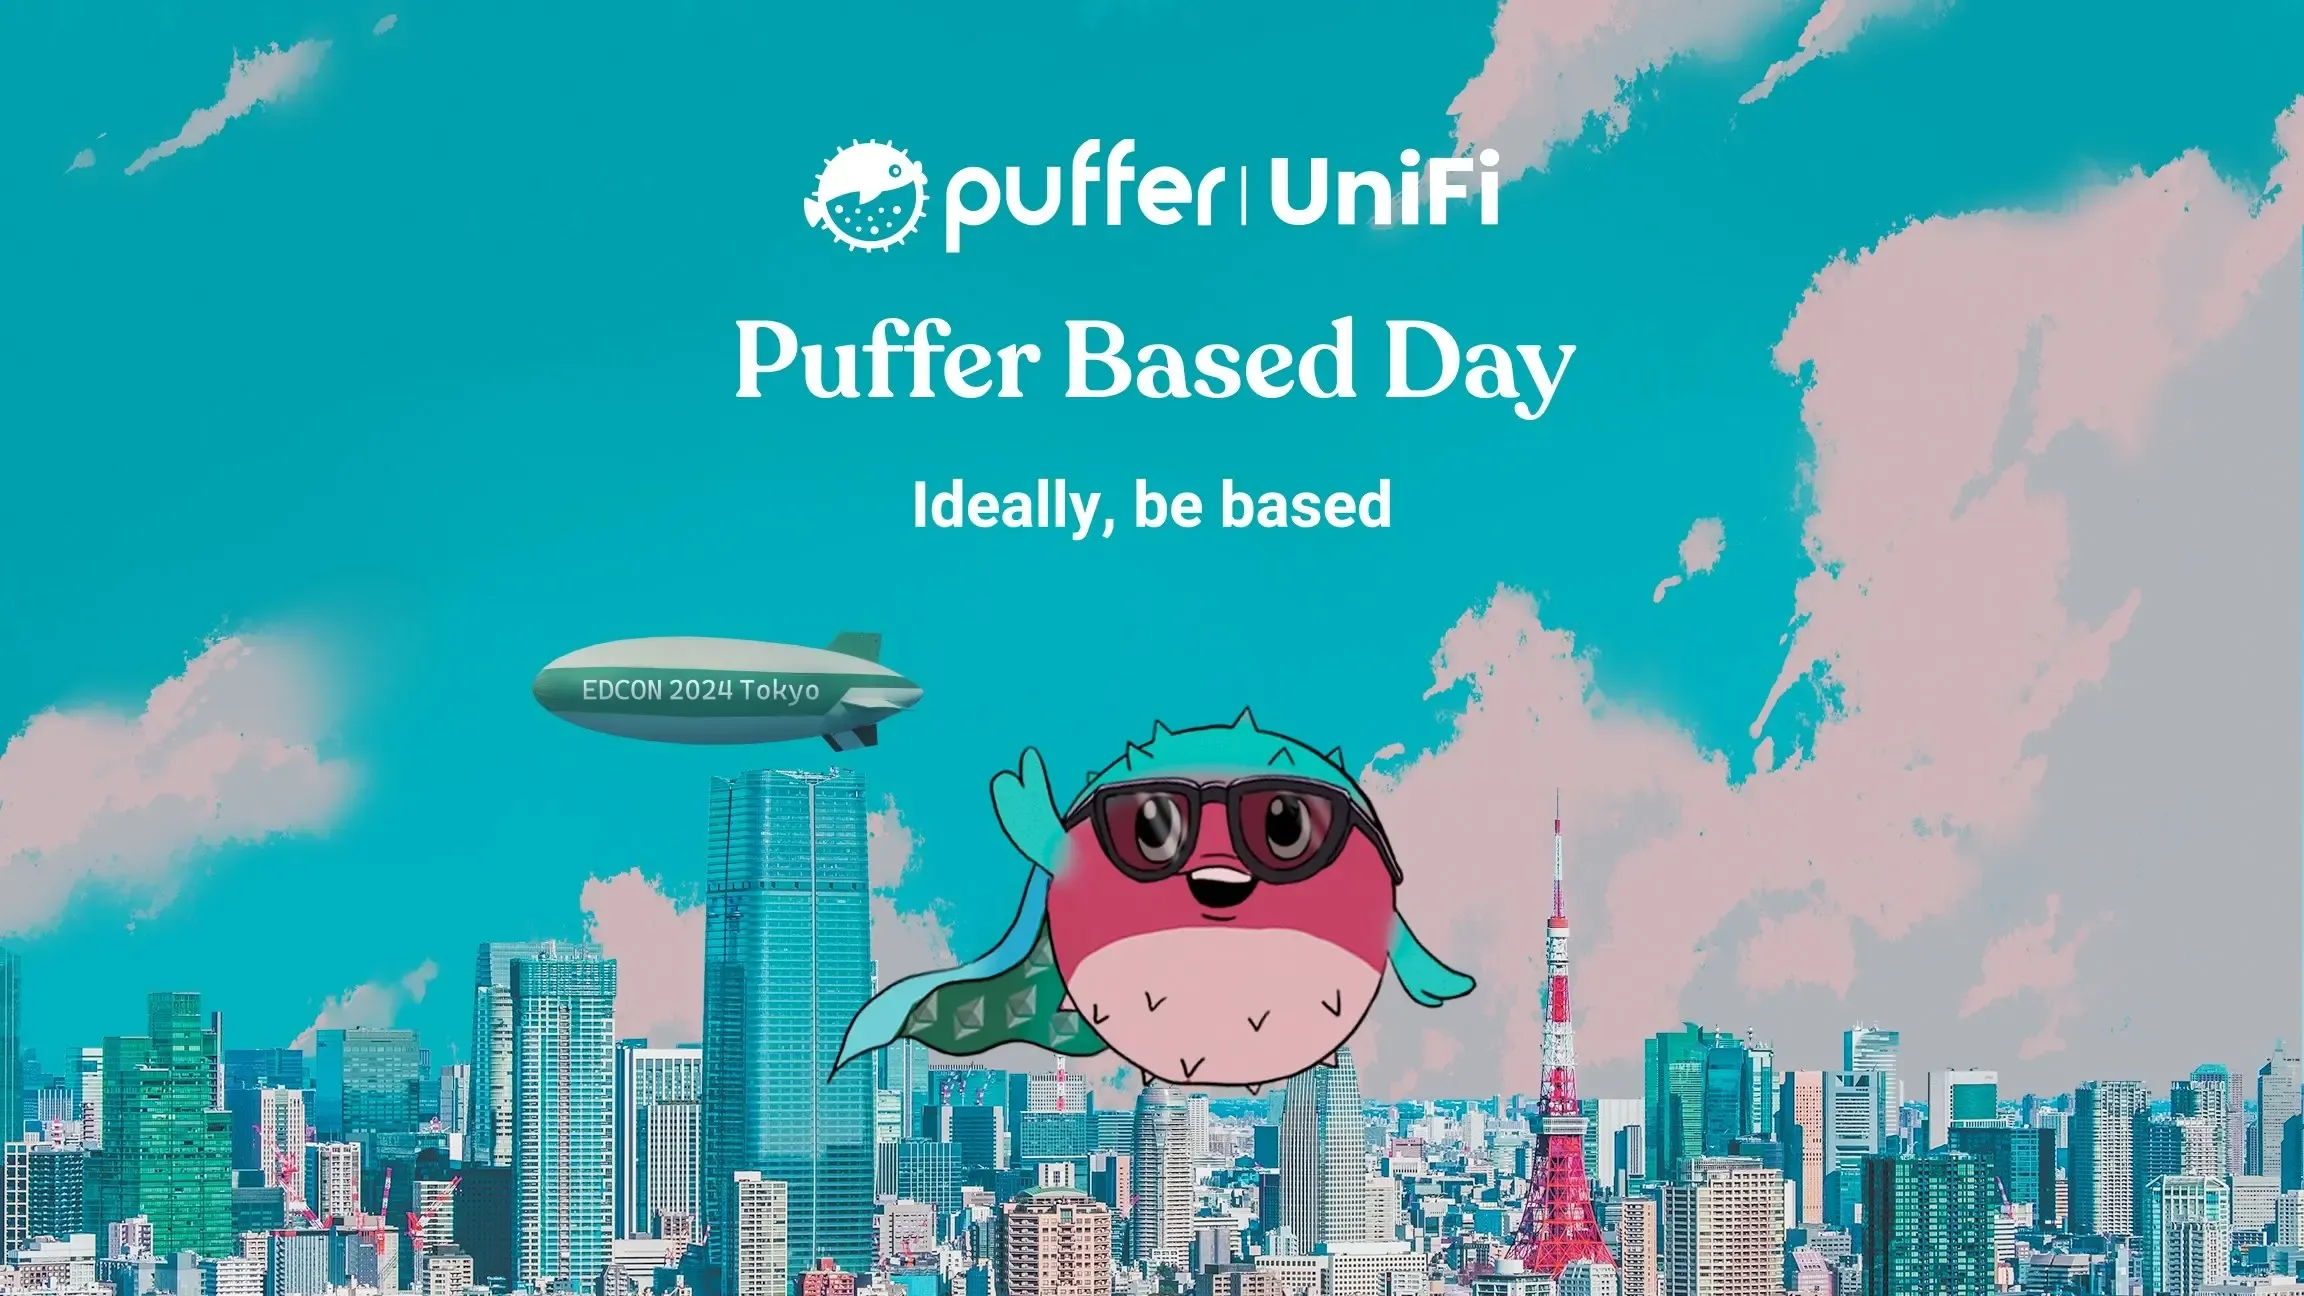 Puffer Based Day